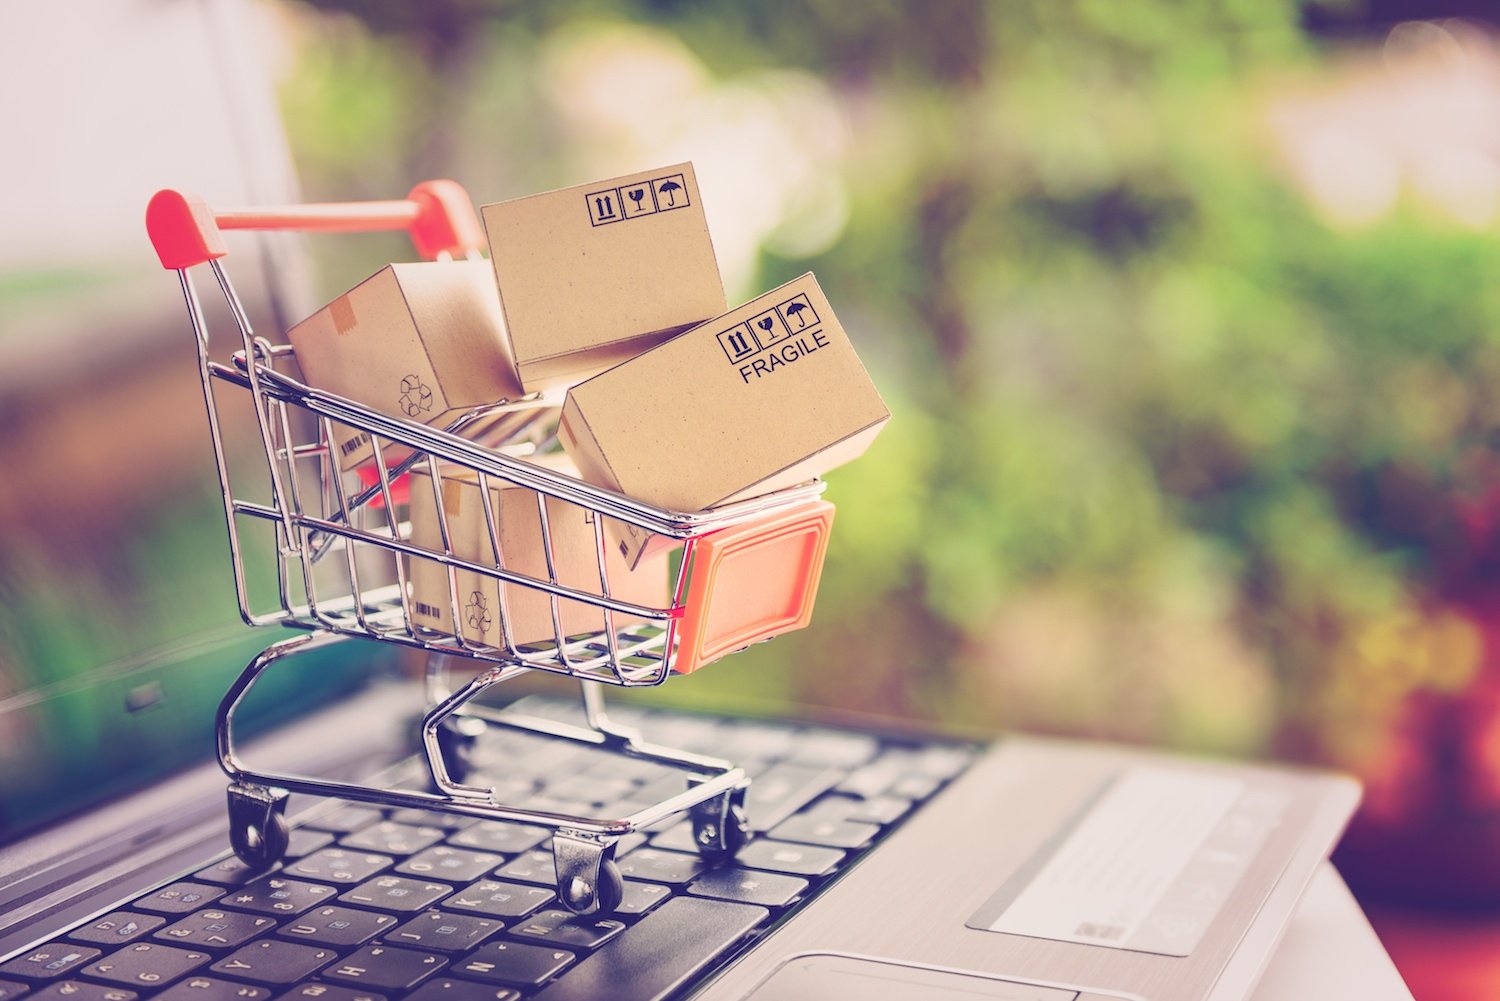 Ecommerce Platforms That Can Leverage Your Business Growth